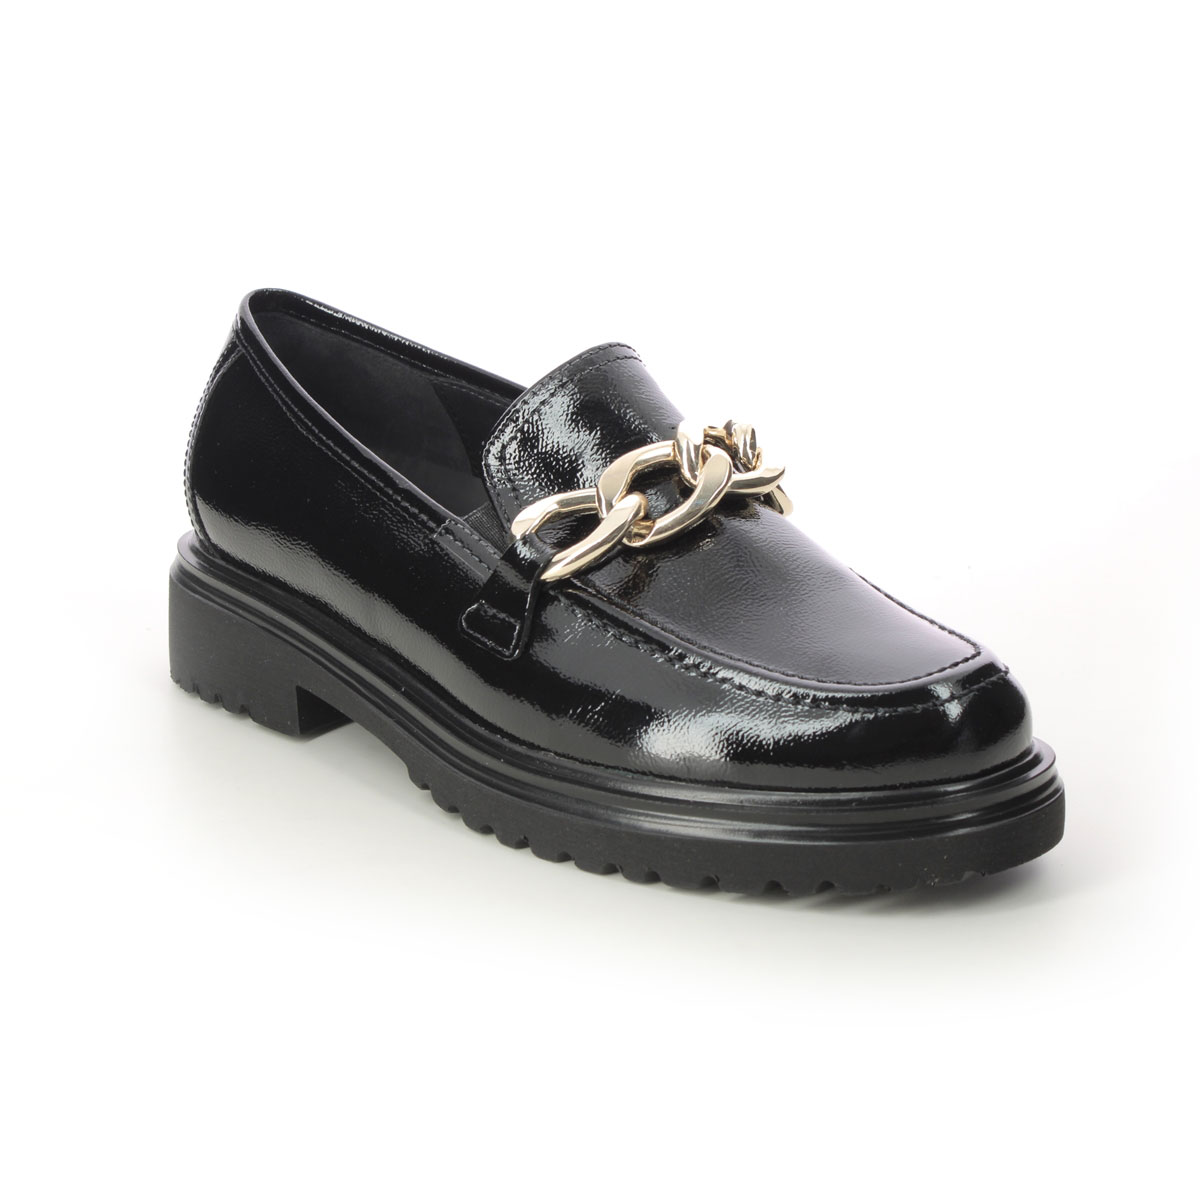 Gabor Florida H Black Patent Womens Loafers 92.554.97 In Size 7.5 In Plain Black Patent  Womens Comfort Slip On Shoes In Soft Black Patent Leather